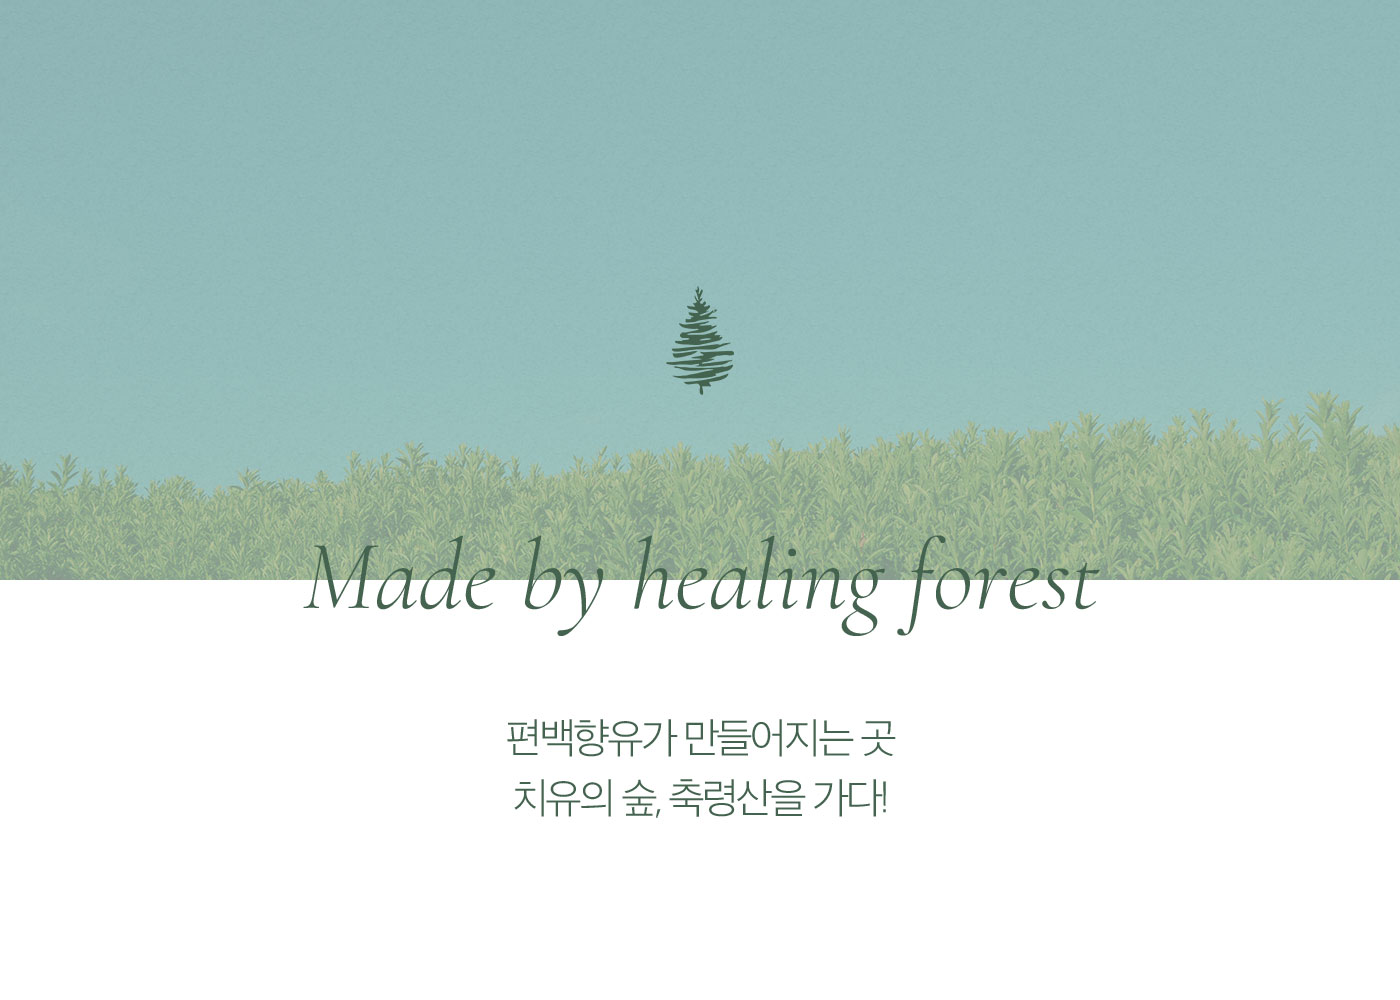 Made by healing forest